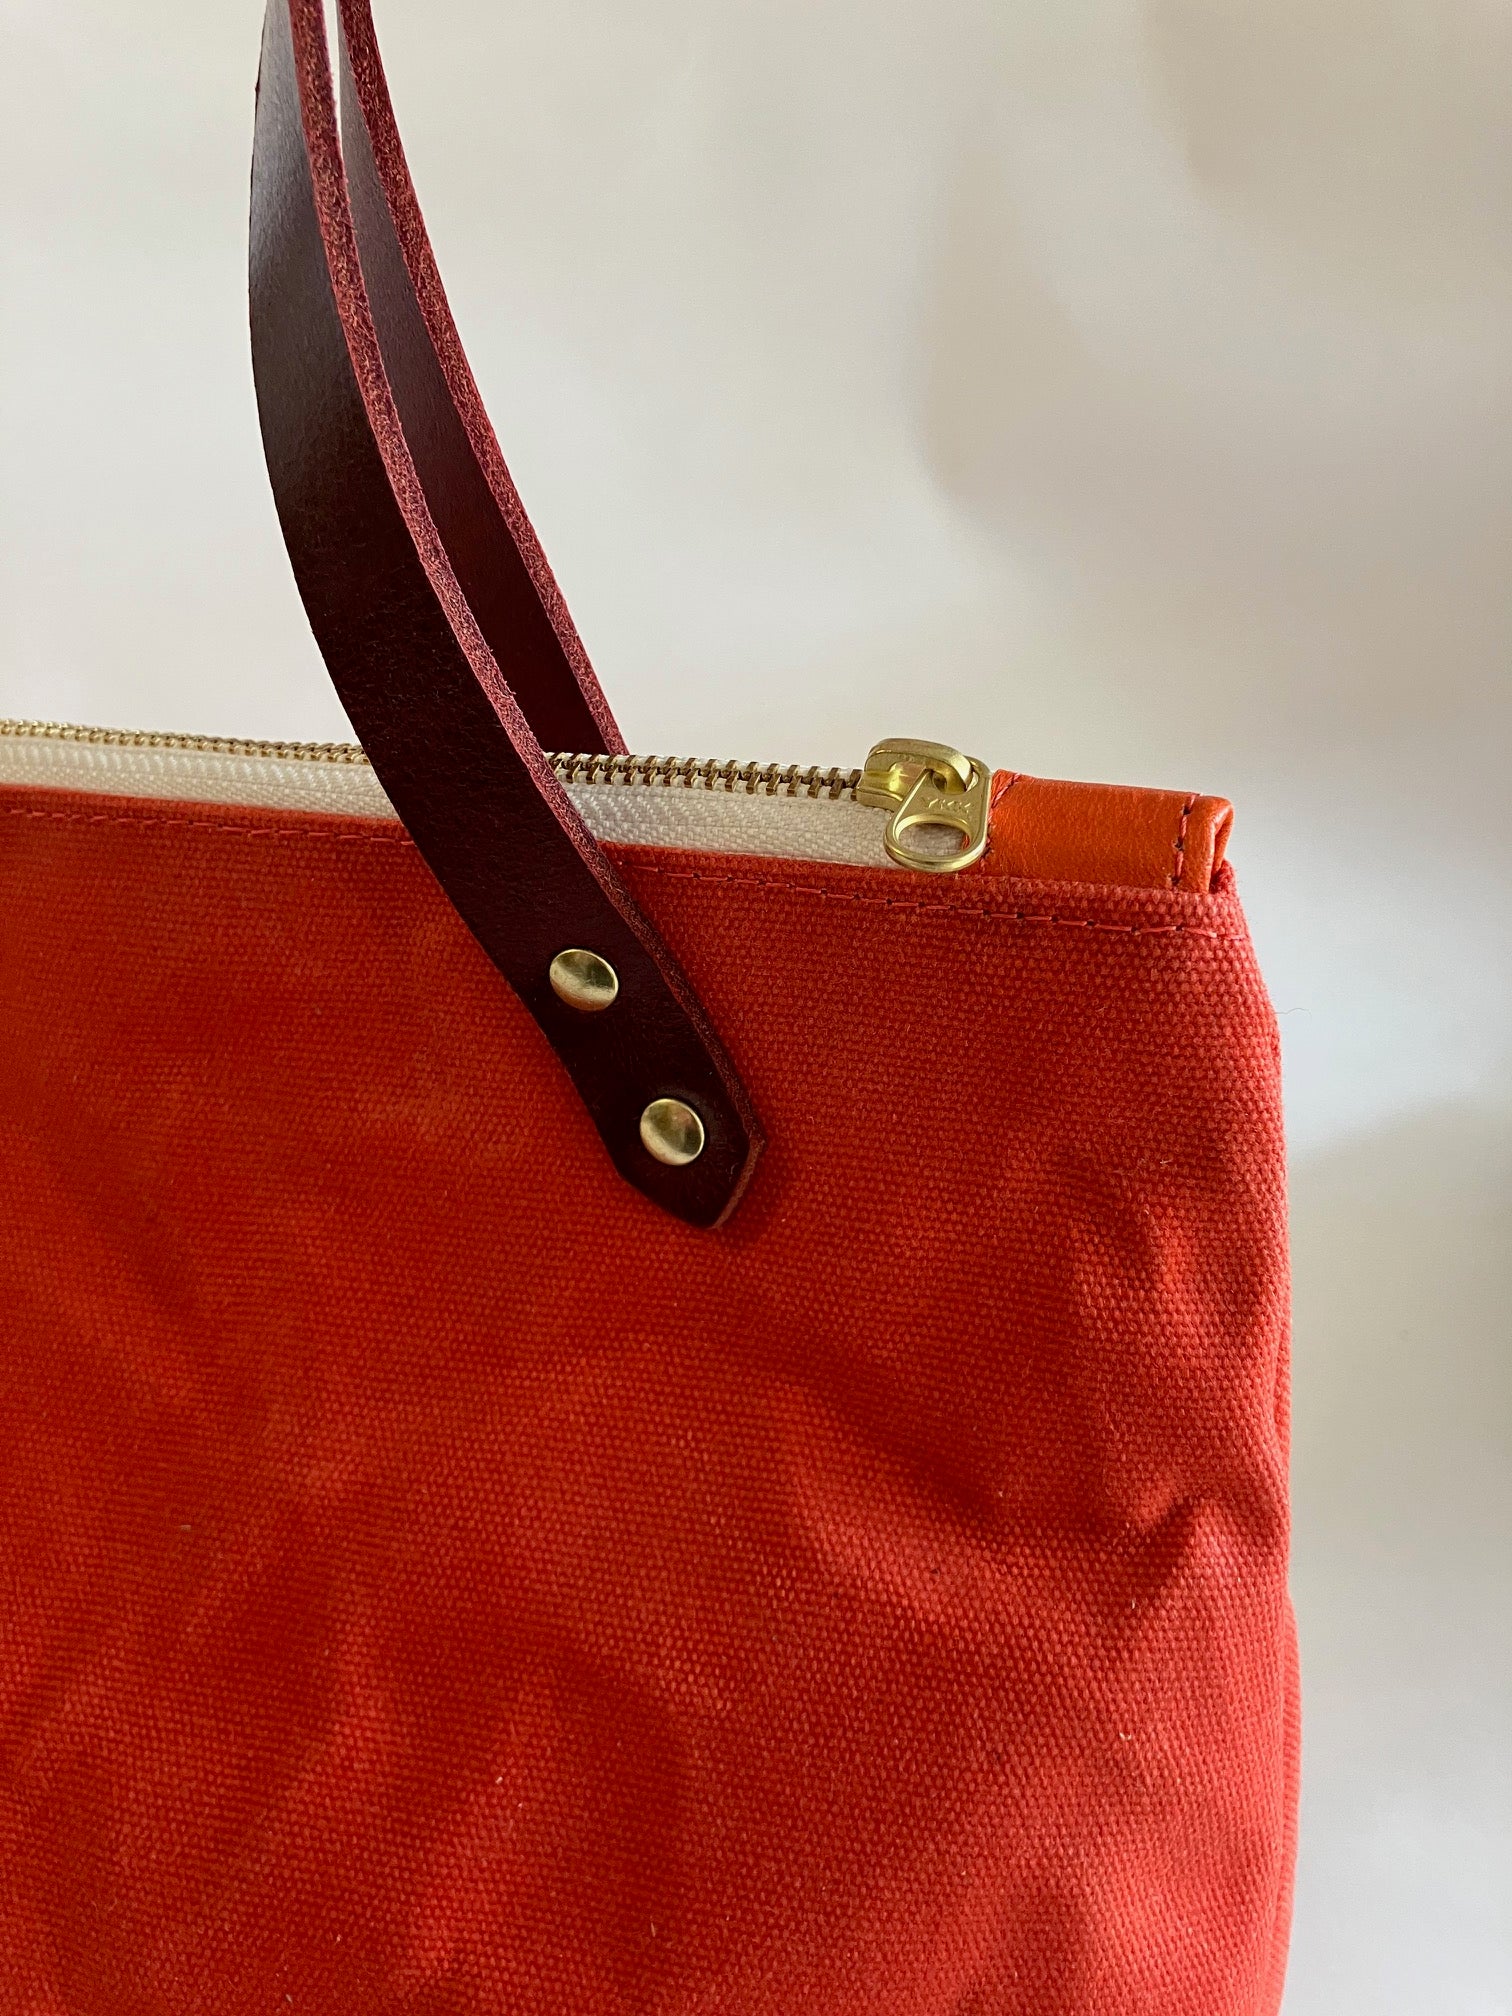 SAMPLE One of a kind Travel bag in coral orange waxed canvas, wax canvas tote bag